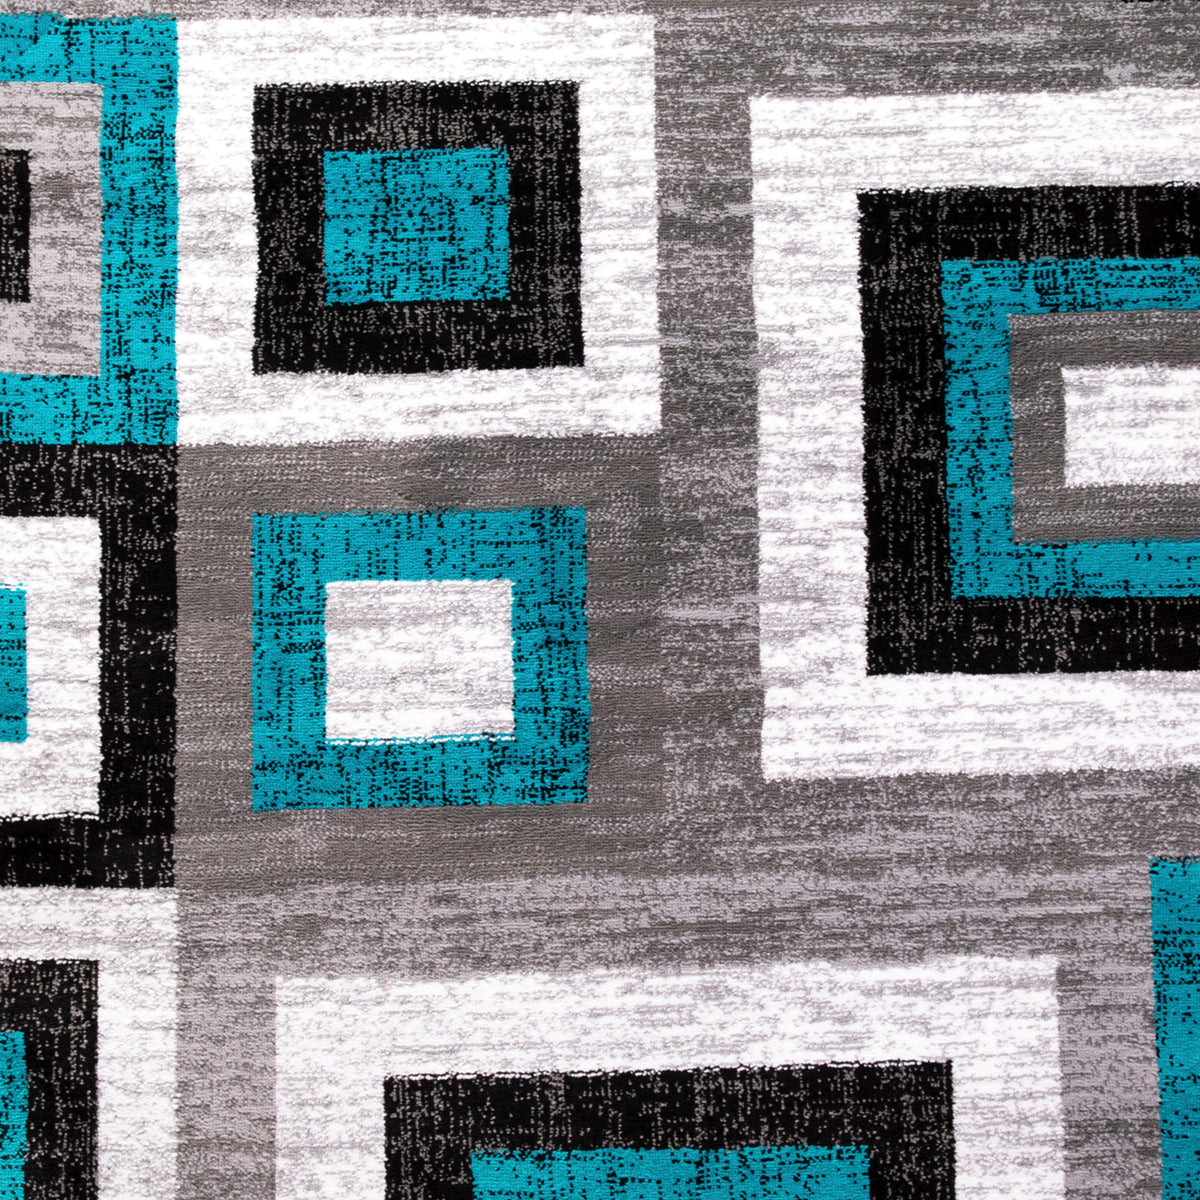 Turquoise,5' Round |#| Modern Round Geometric Design Area Rug in Turquoise, Grey, and White - 5' x 5'